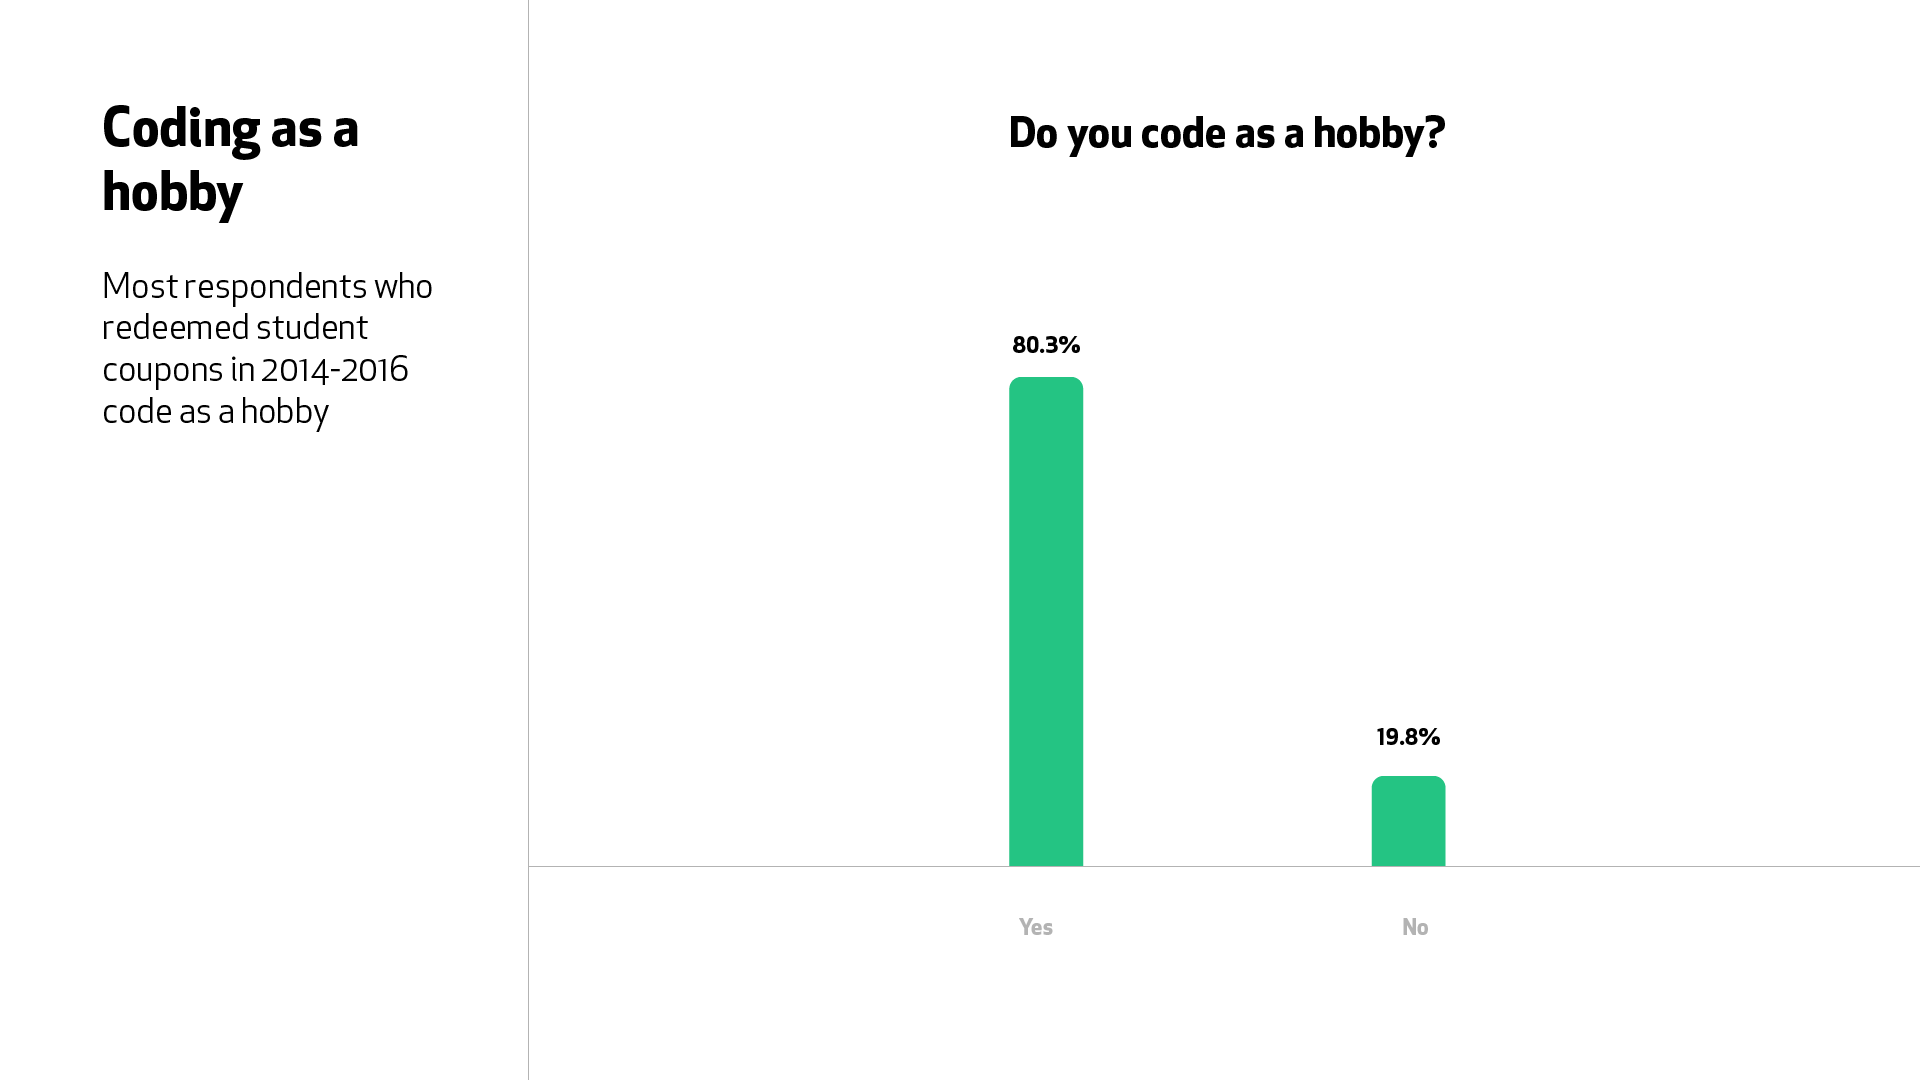 A graph for the question “Do you code as a hobby?” 80.3% said “yes”.